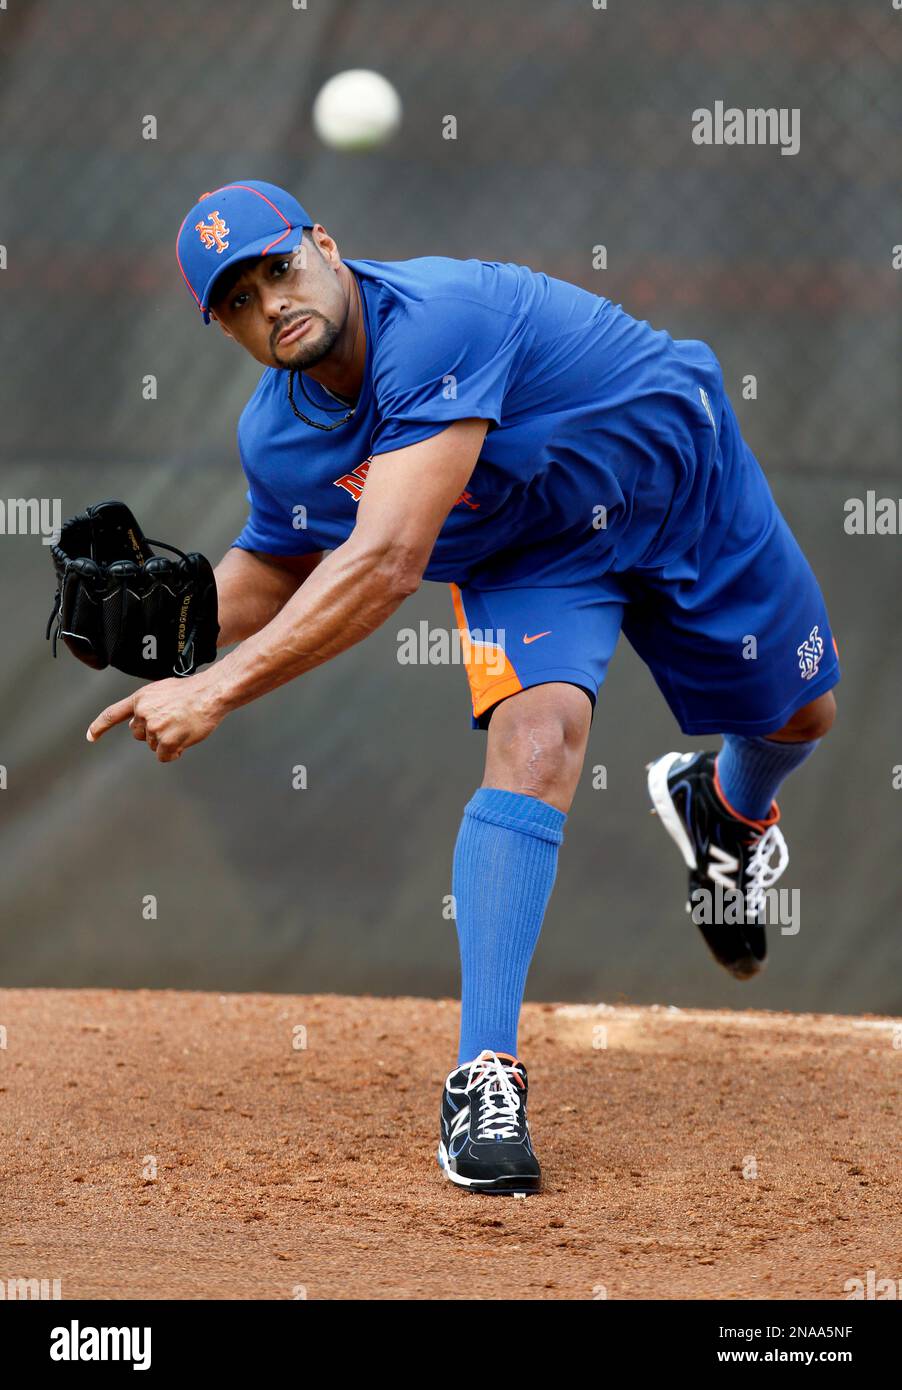 Pitcher Johan Santana wears his new cap and jersey during a news News  Photo - Getty Images